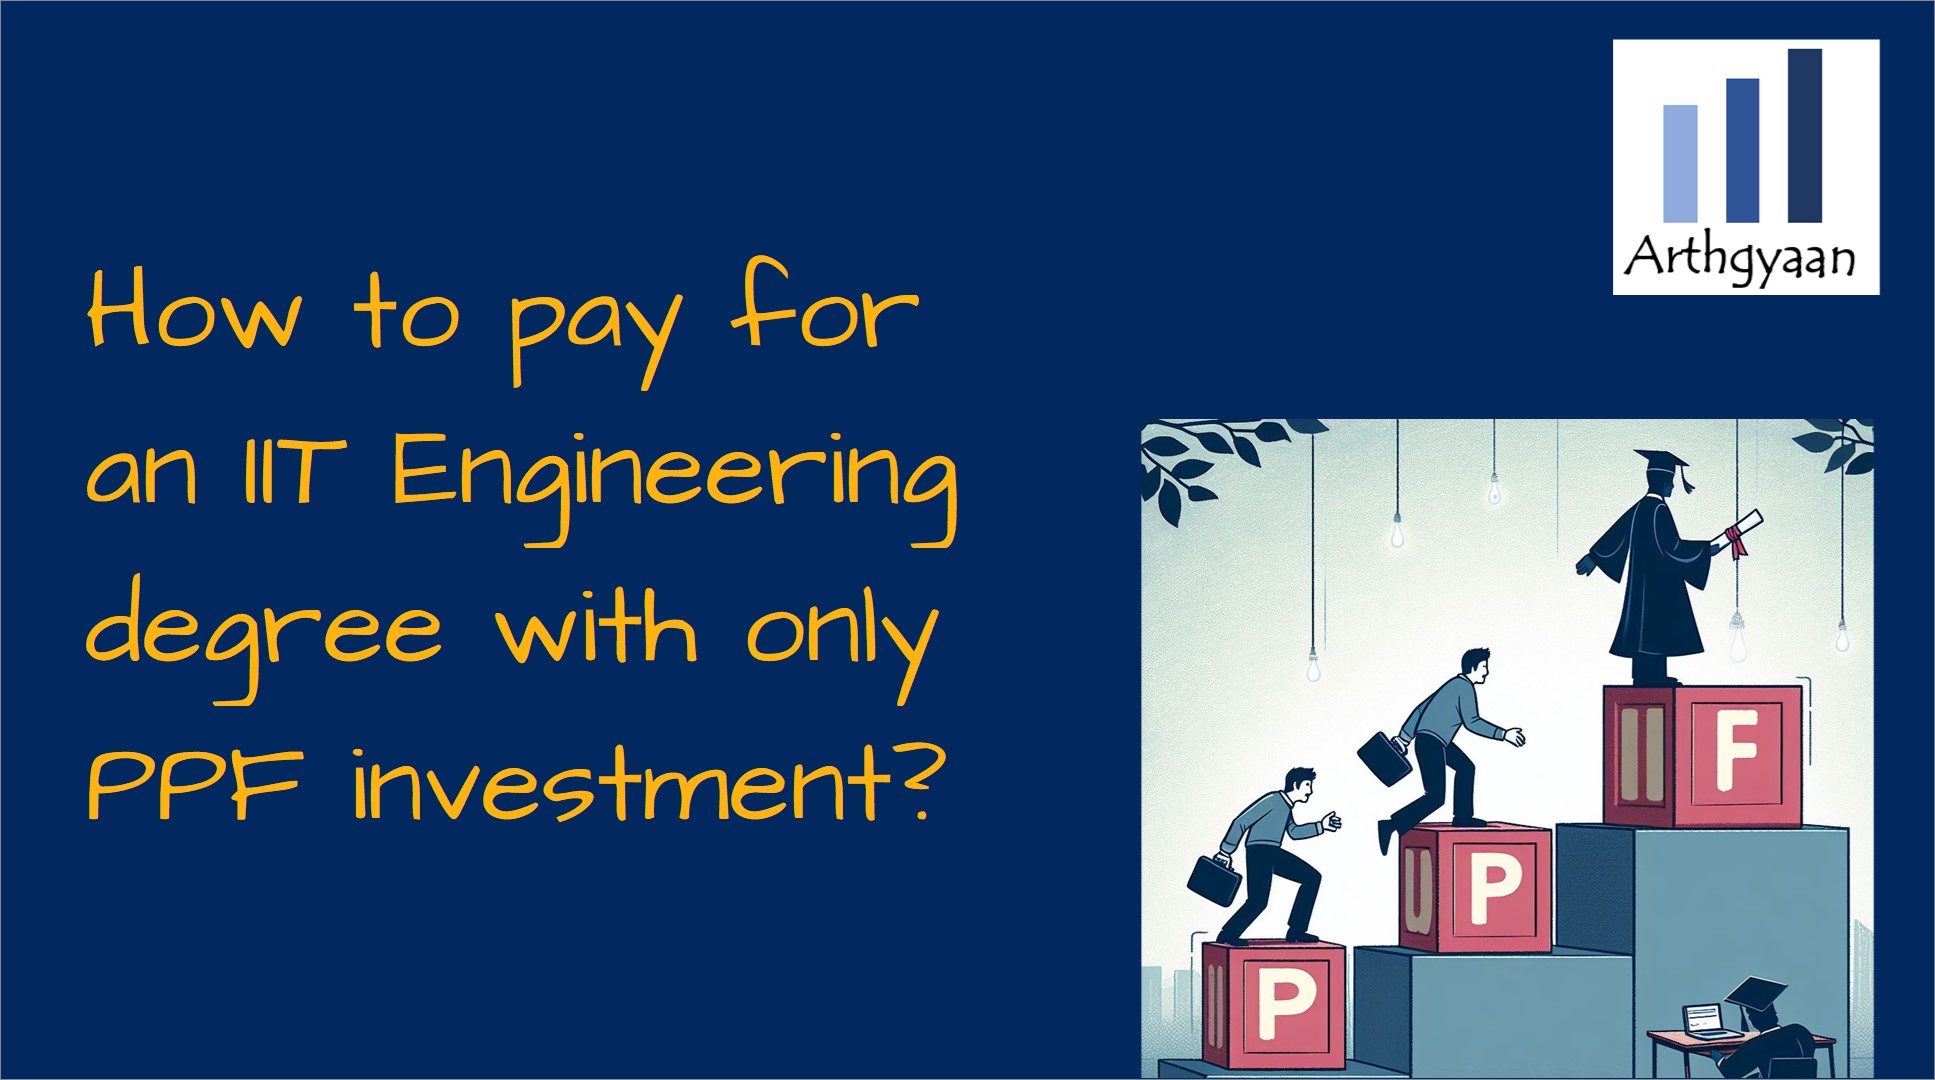 How to pay for an IIT Engineering degree with only PPF investment?